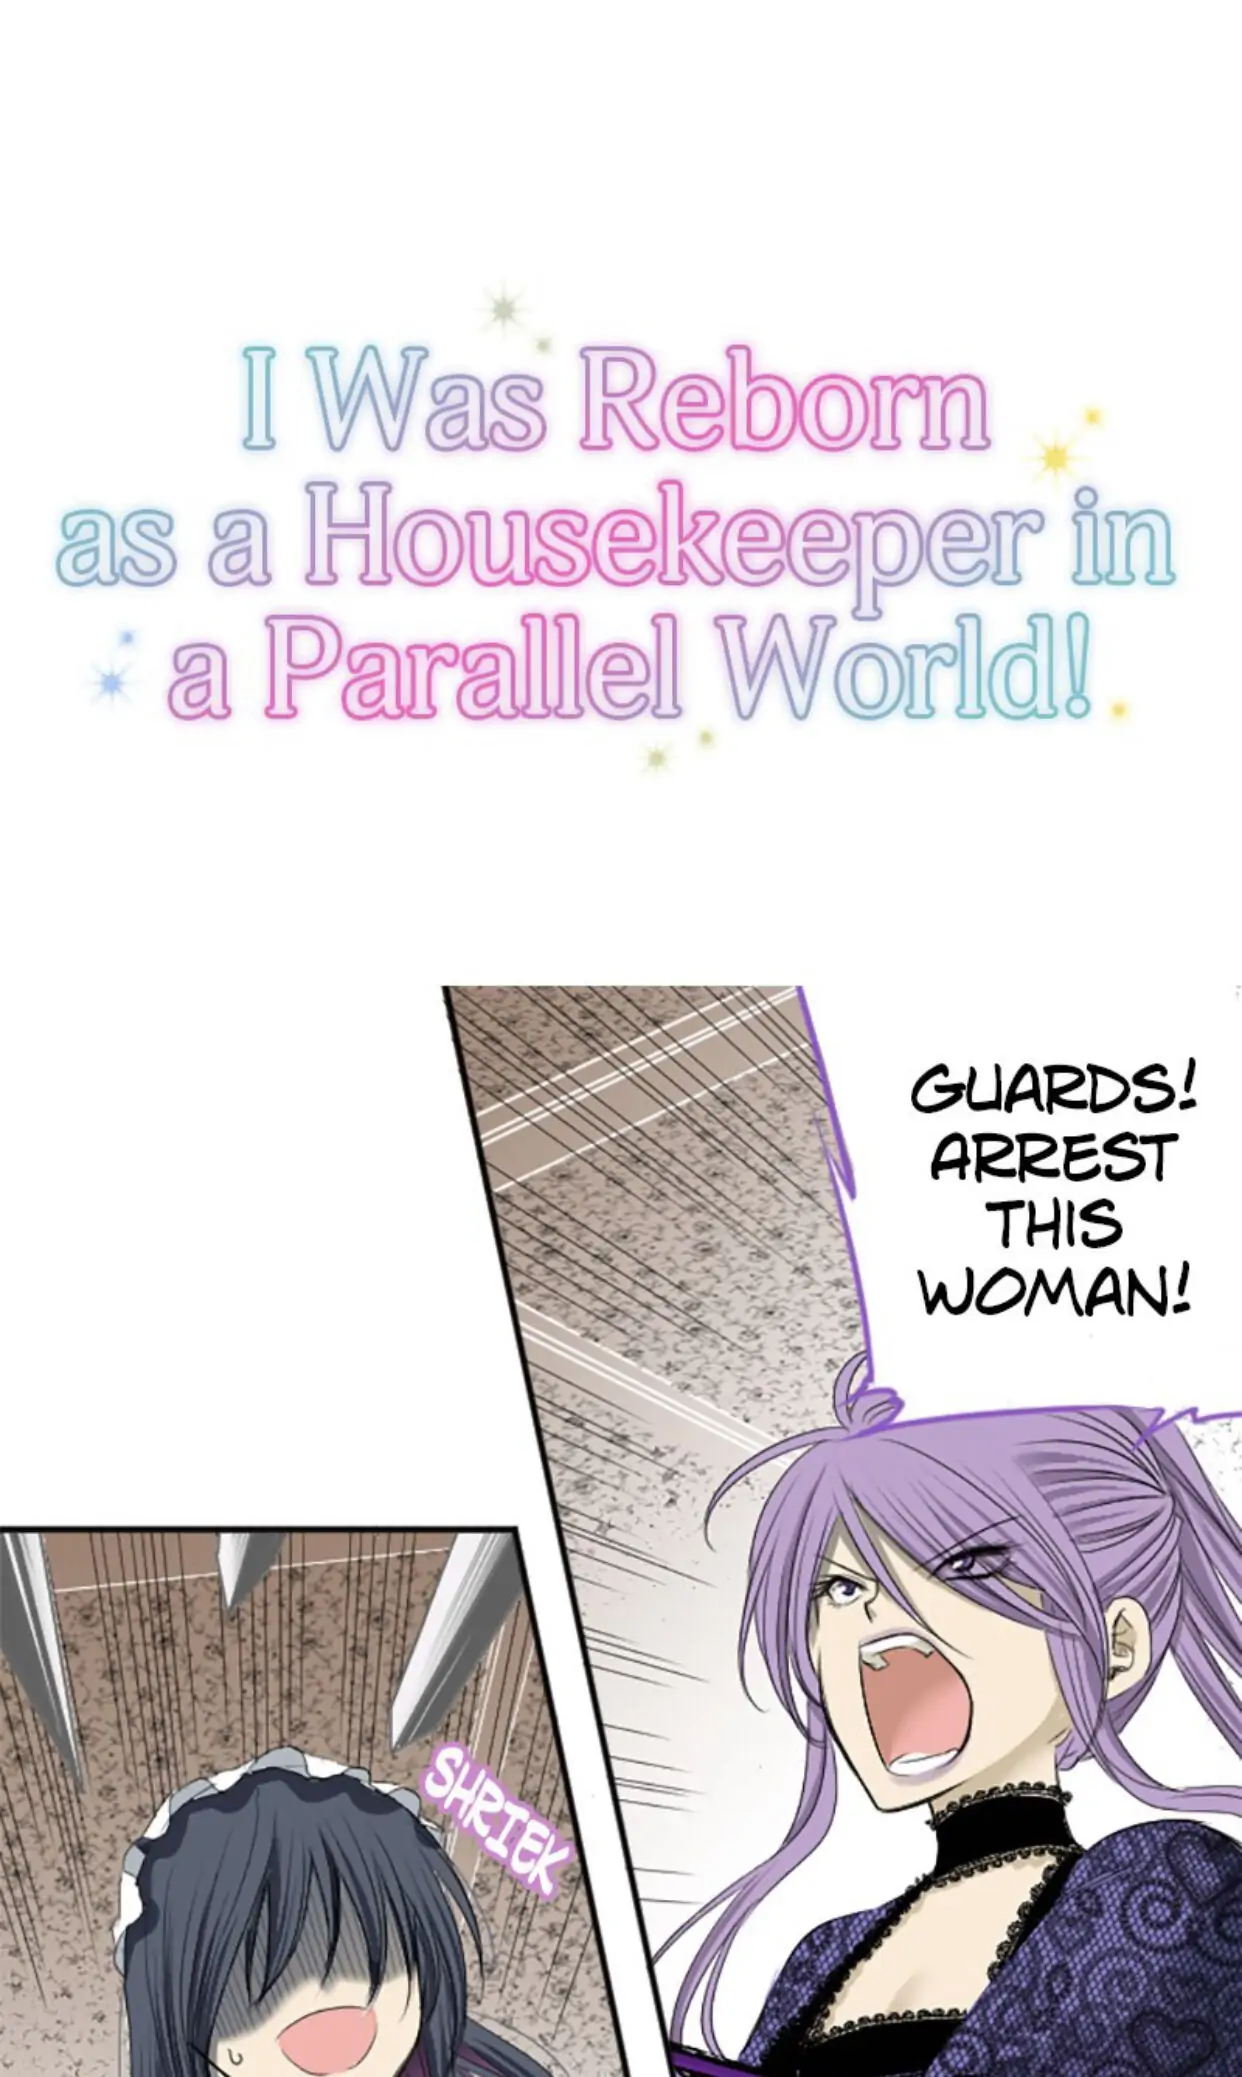 I was Reborn as a Housekeeper in a Parallel World! chapter 2